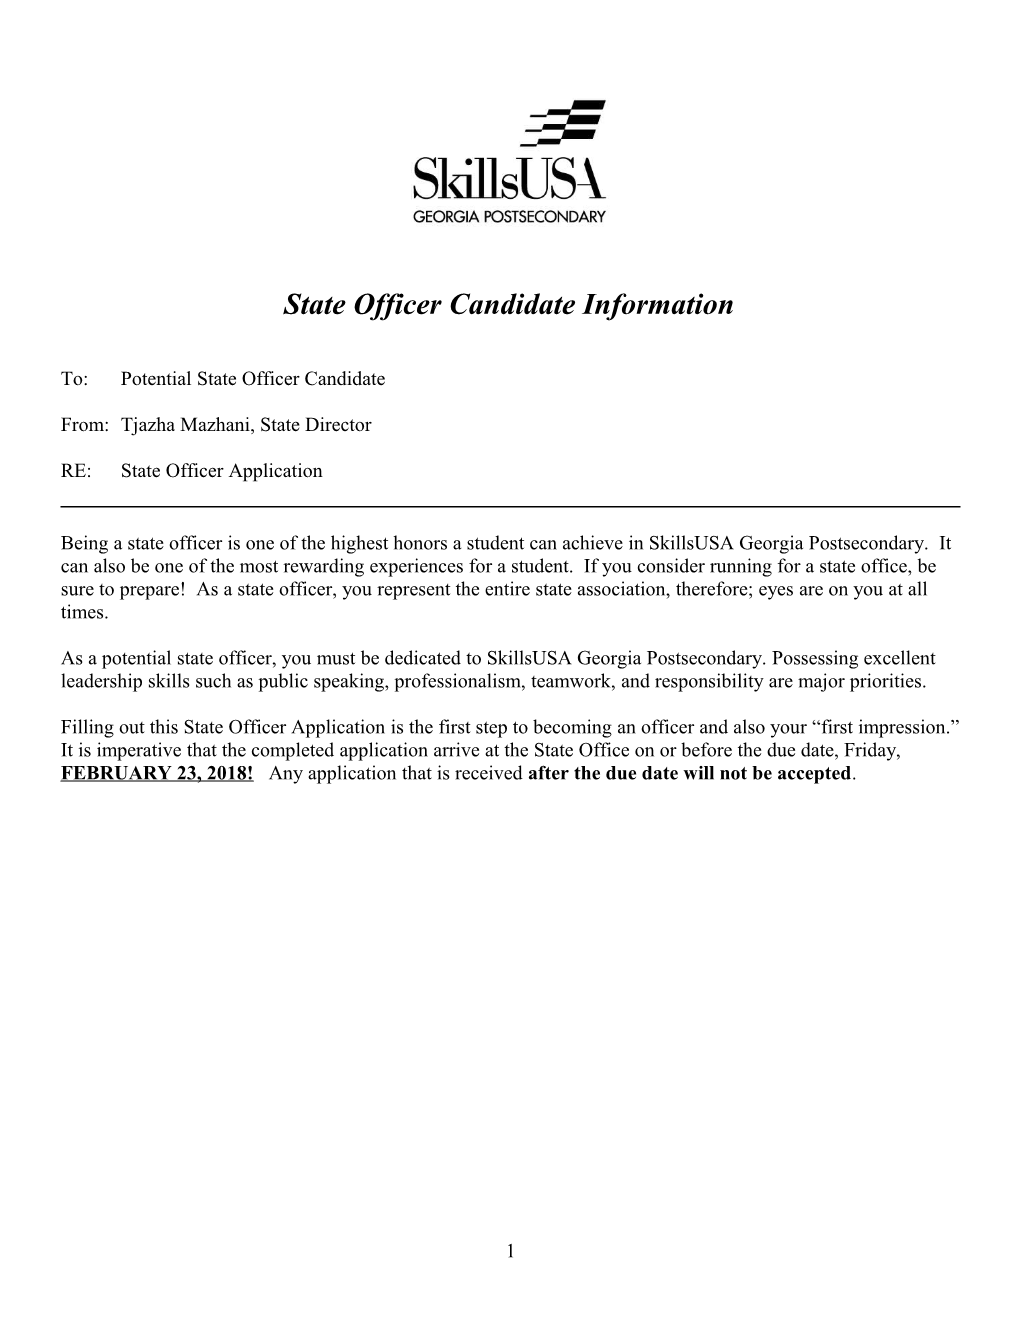 State Officer Candidate Information